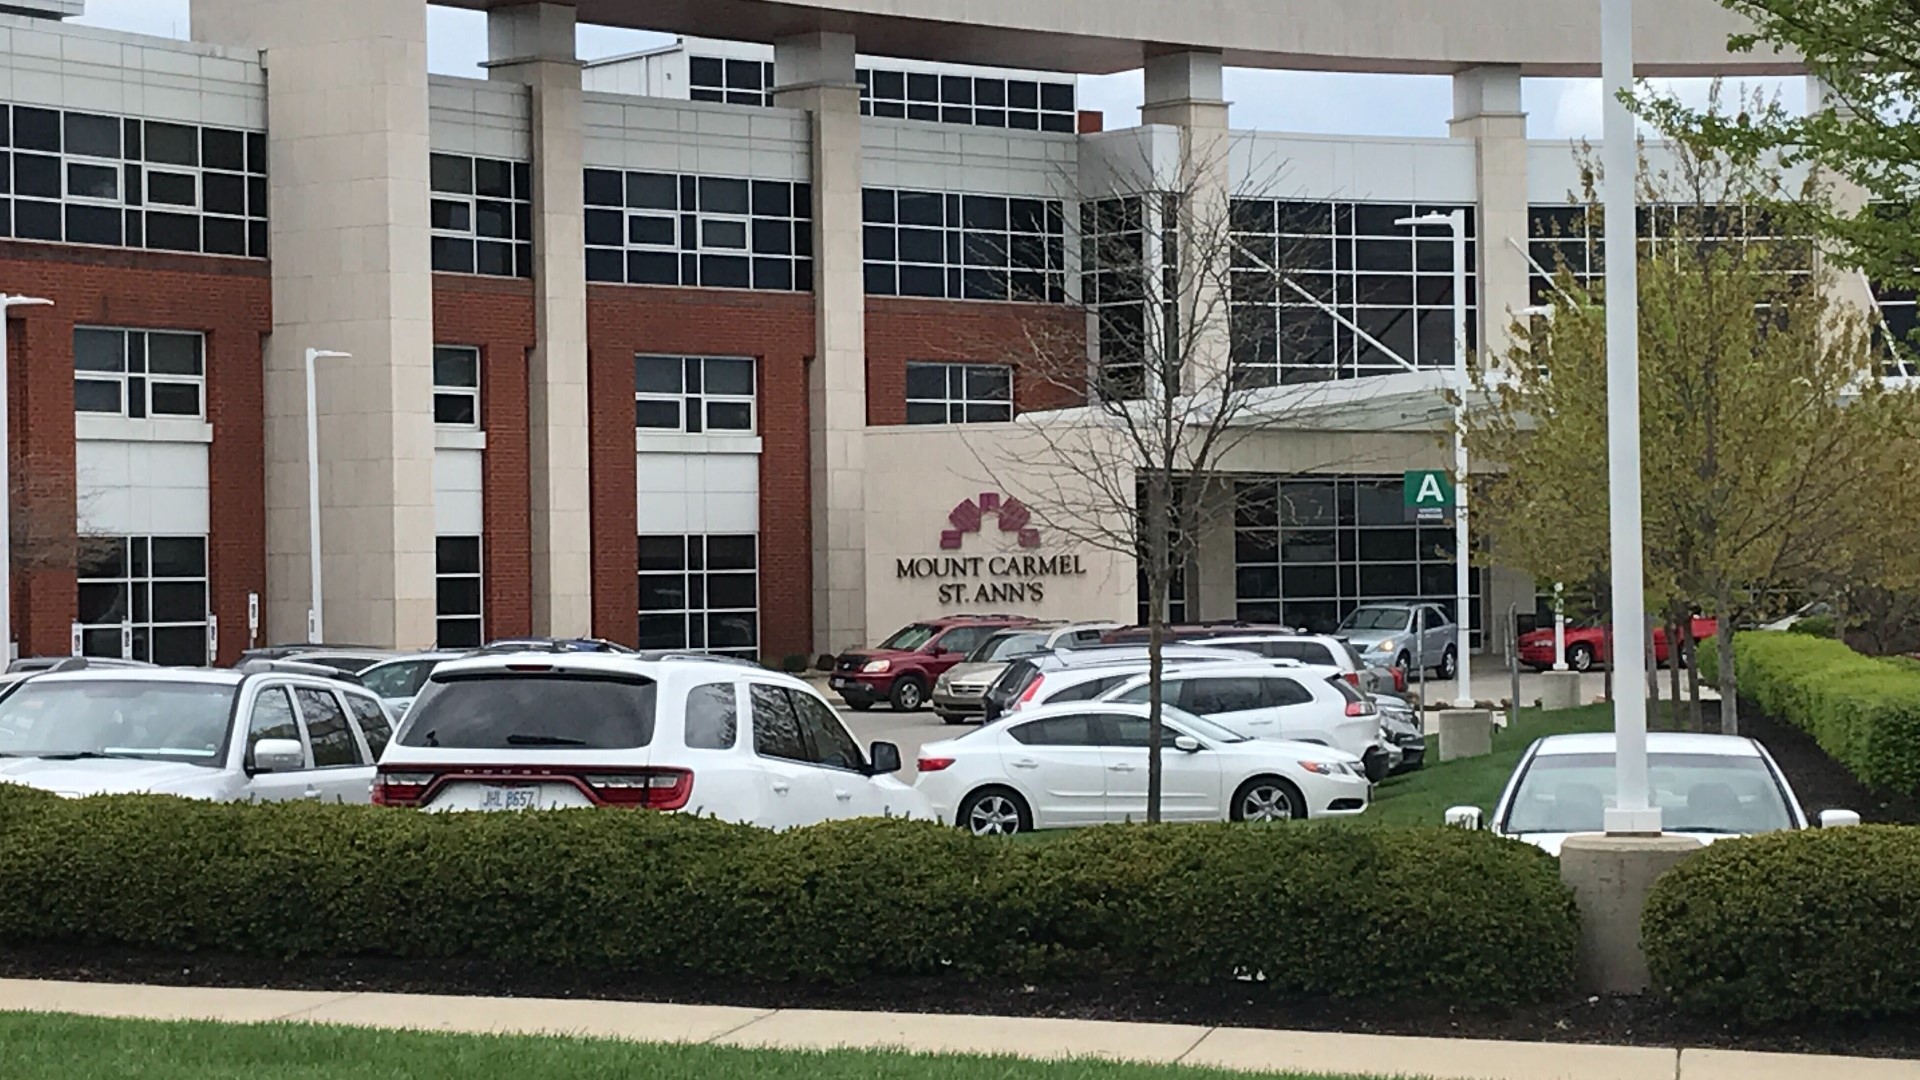 The shooting happened inside the emergency room at the hospital around 2:15 p.m. Monday.